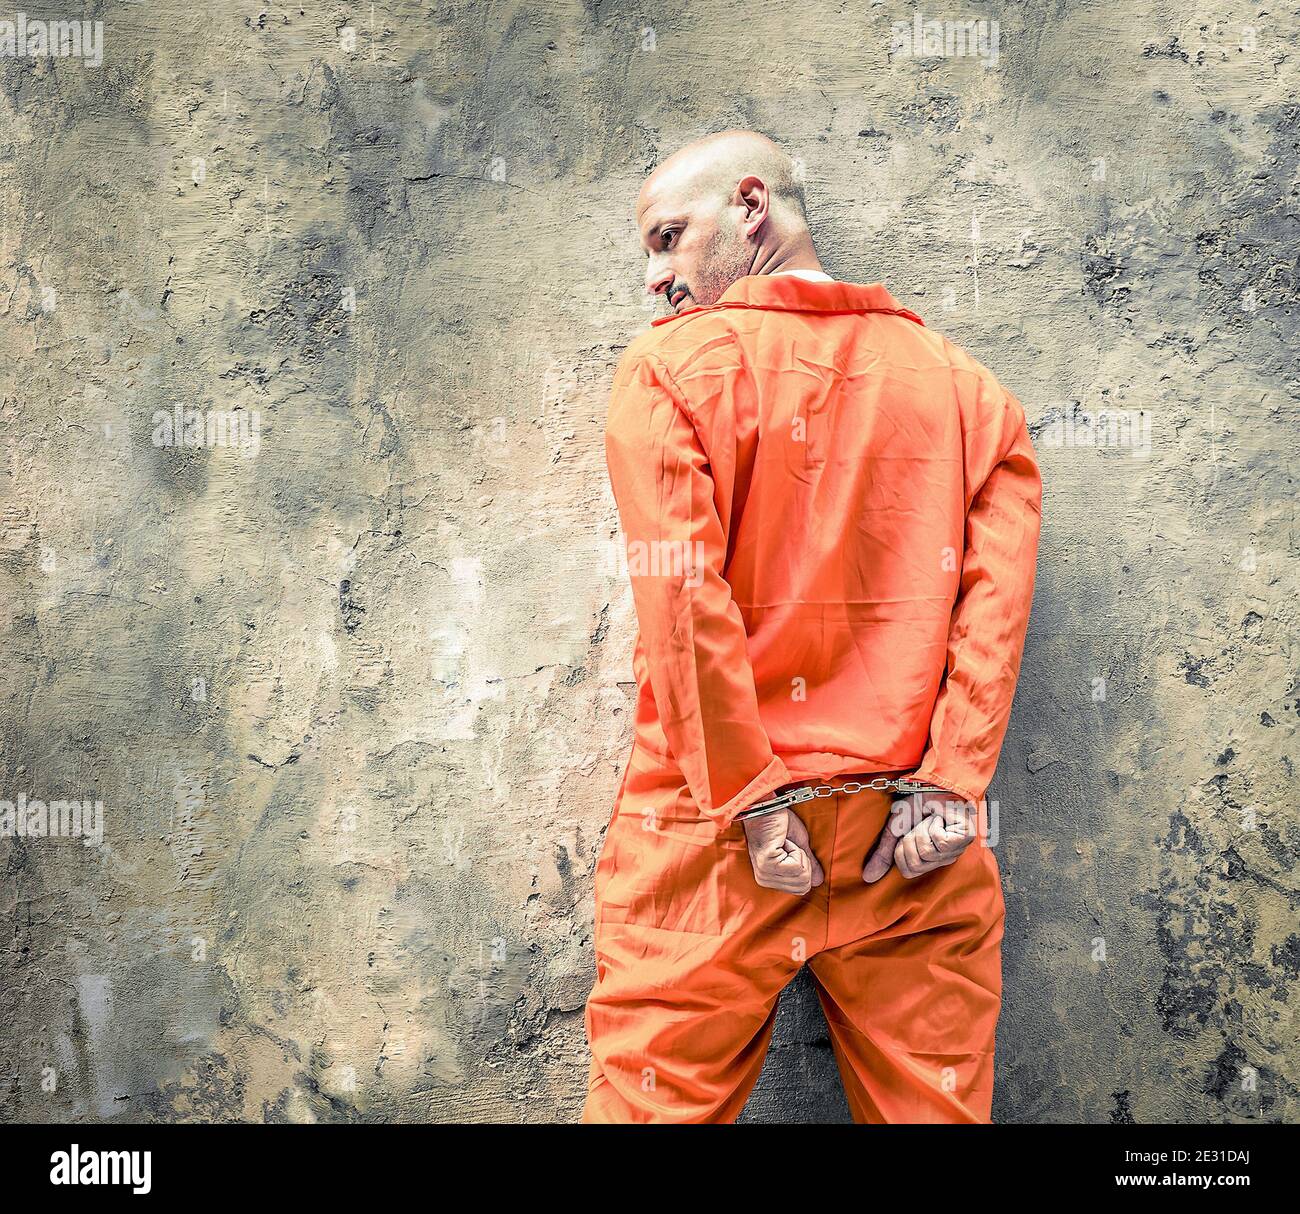 Handcuffed Prisoners waiting for Death Penalty Stock Photo